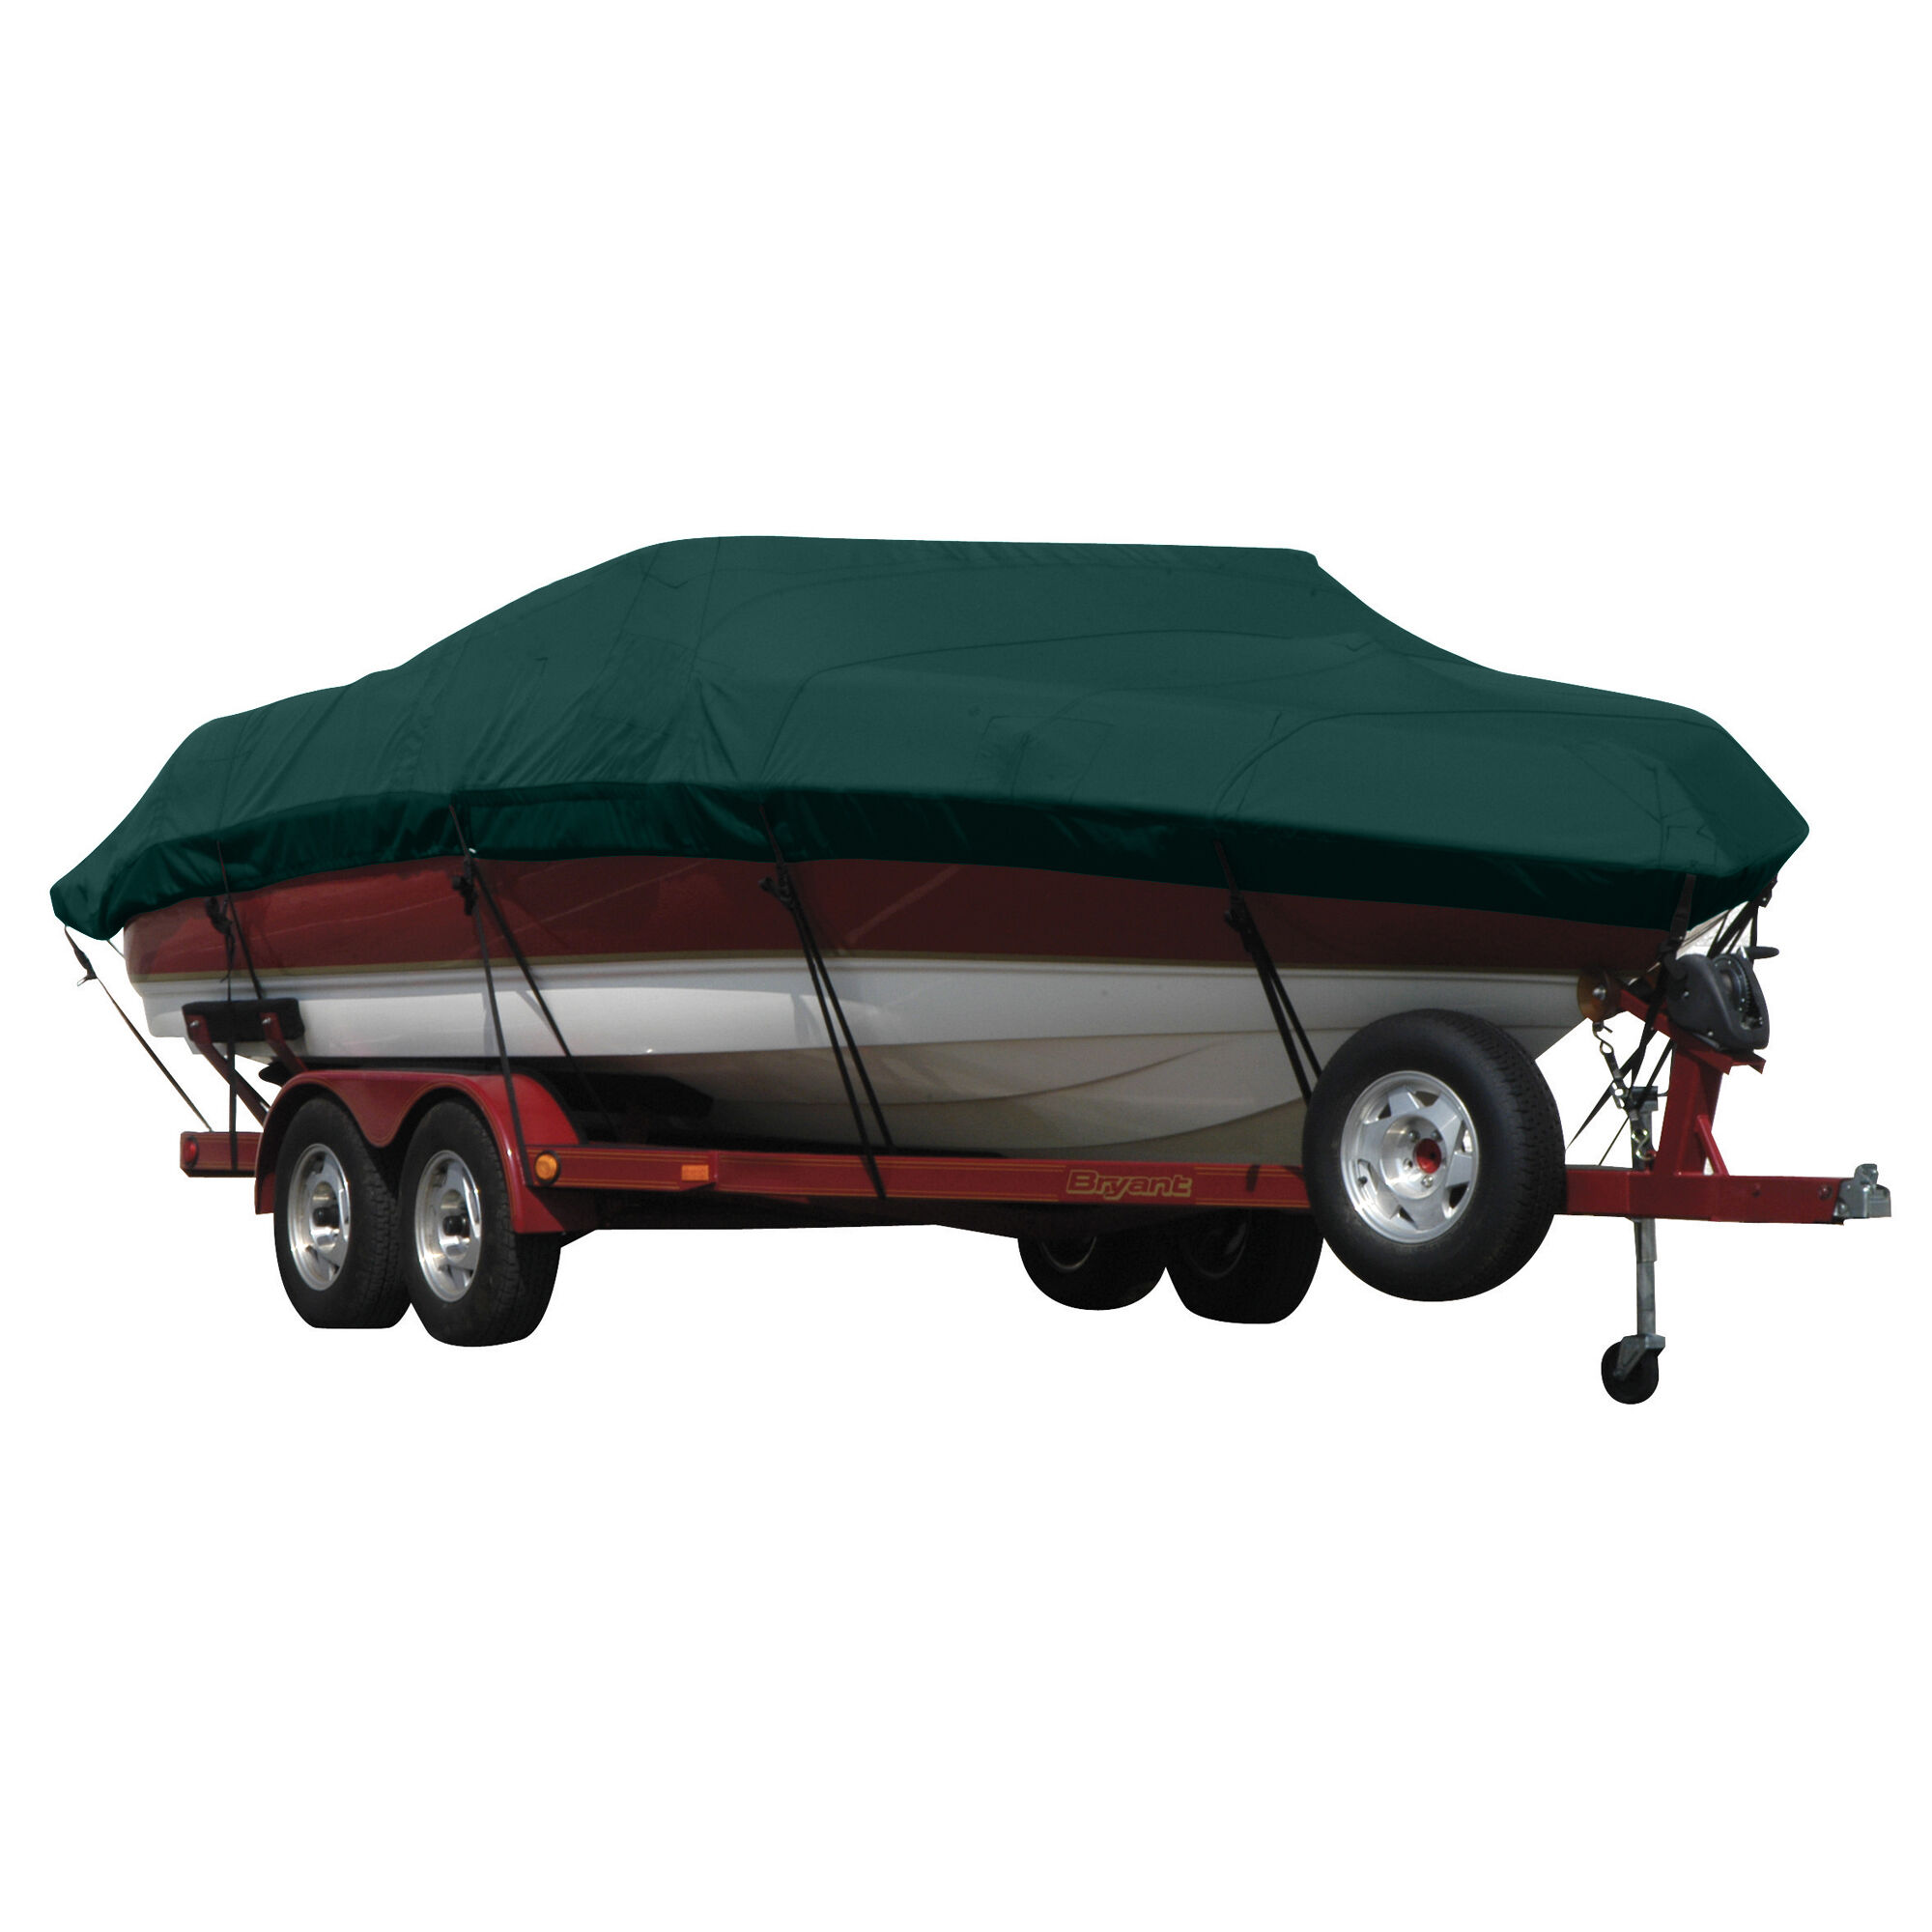 Covermate Exact Fit Sunbrella Boat Cover for Hydrodyne Gtx Air Gtx Air w/ Tower Doesn't Cover Swim PLATFORMm I/B. Forest Green